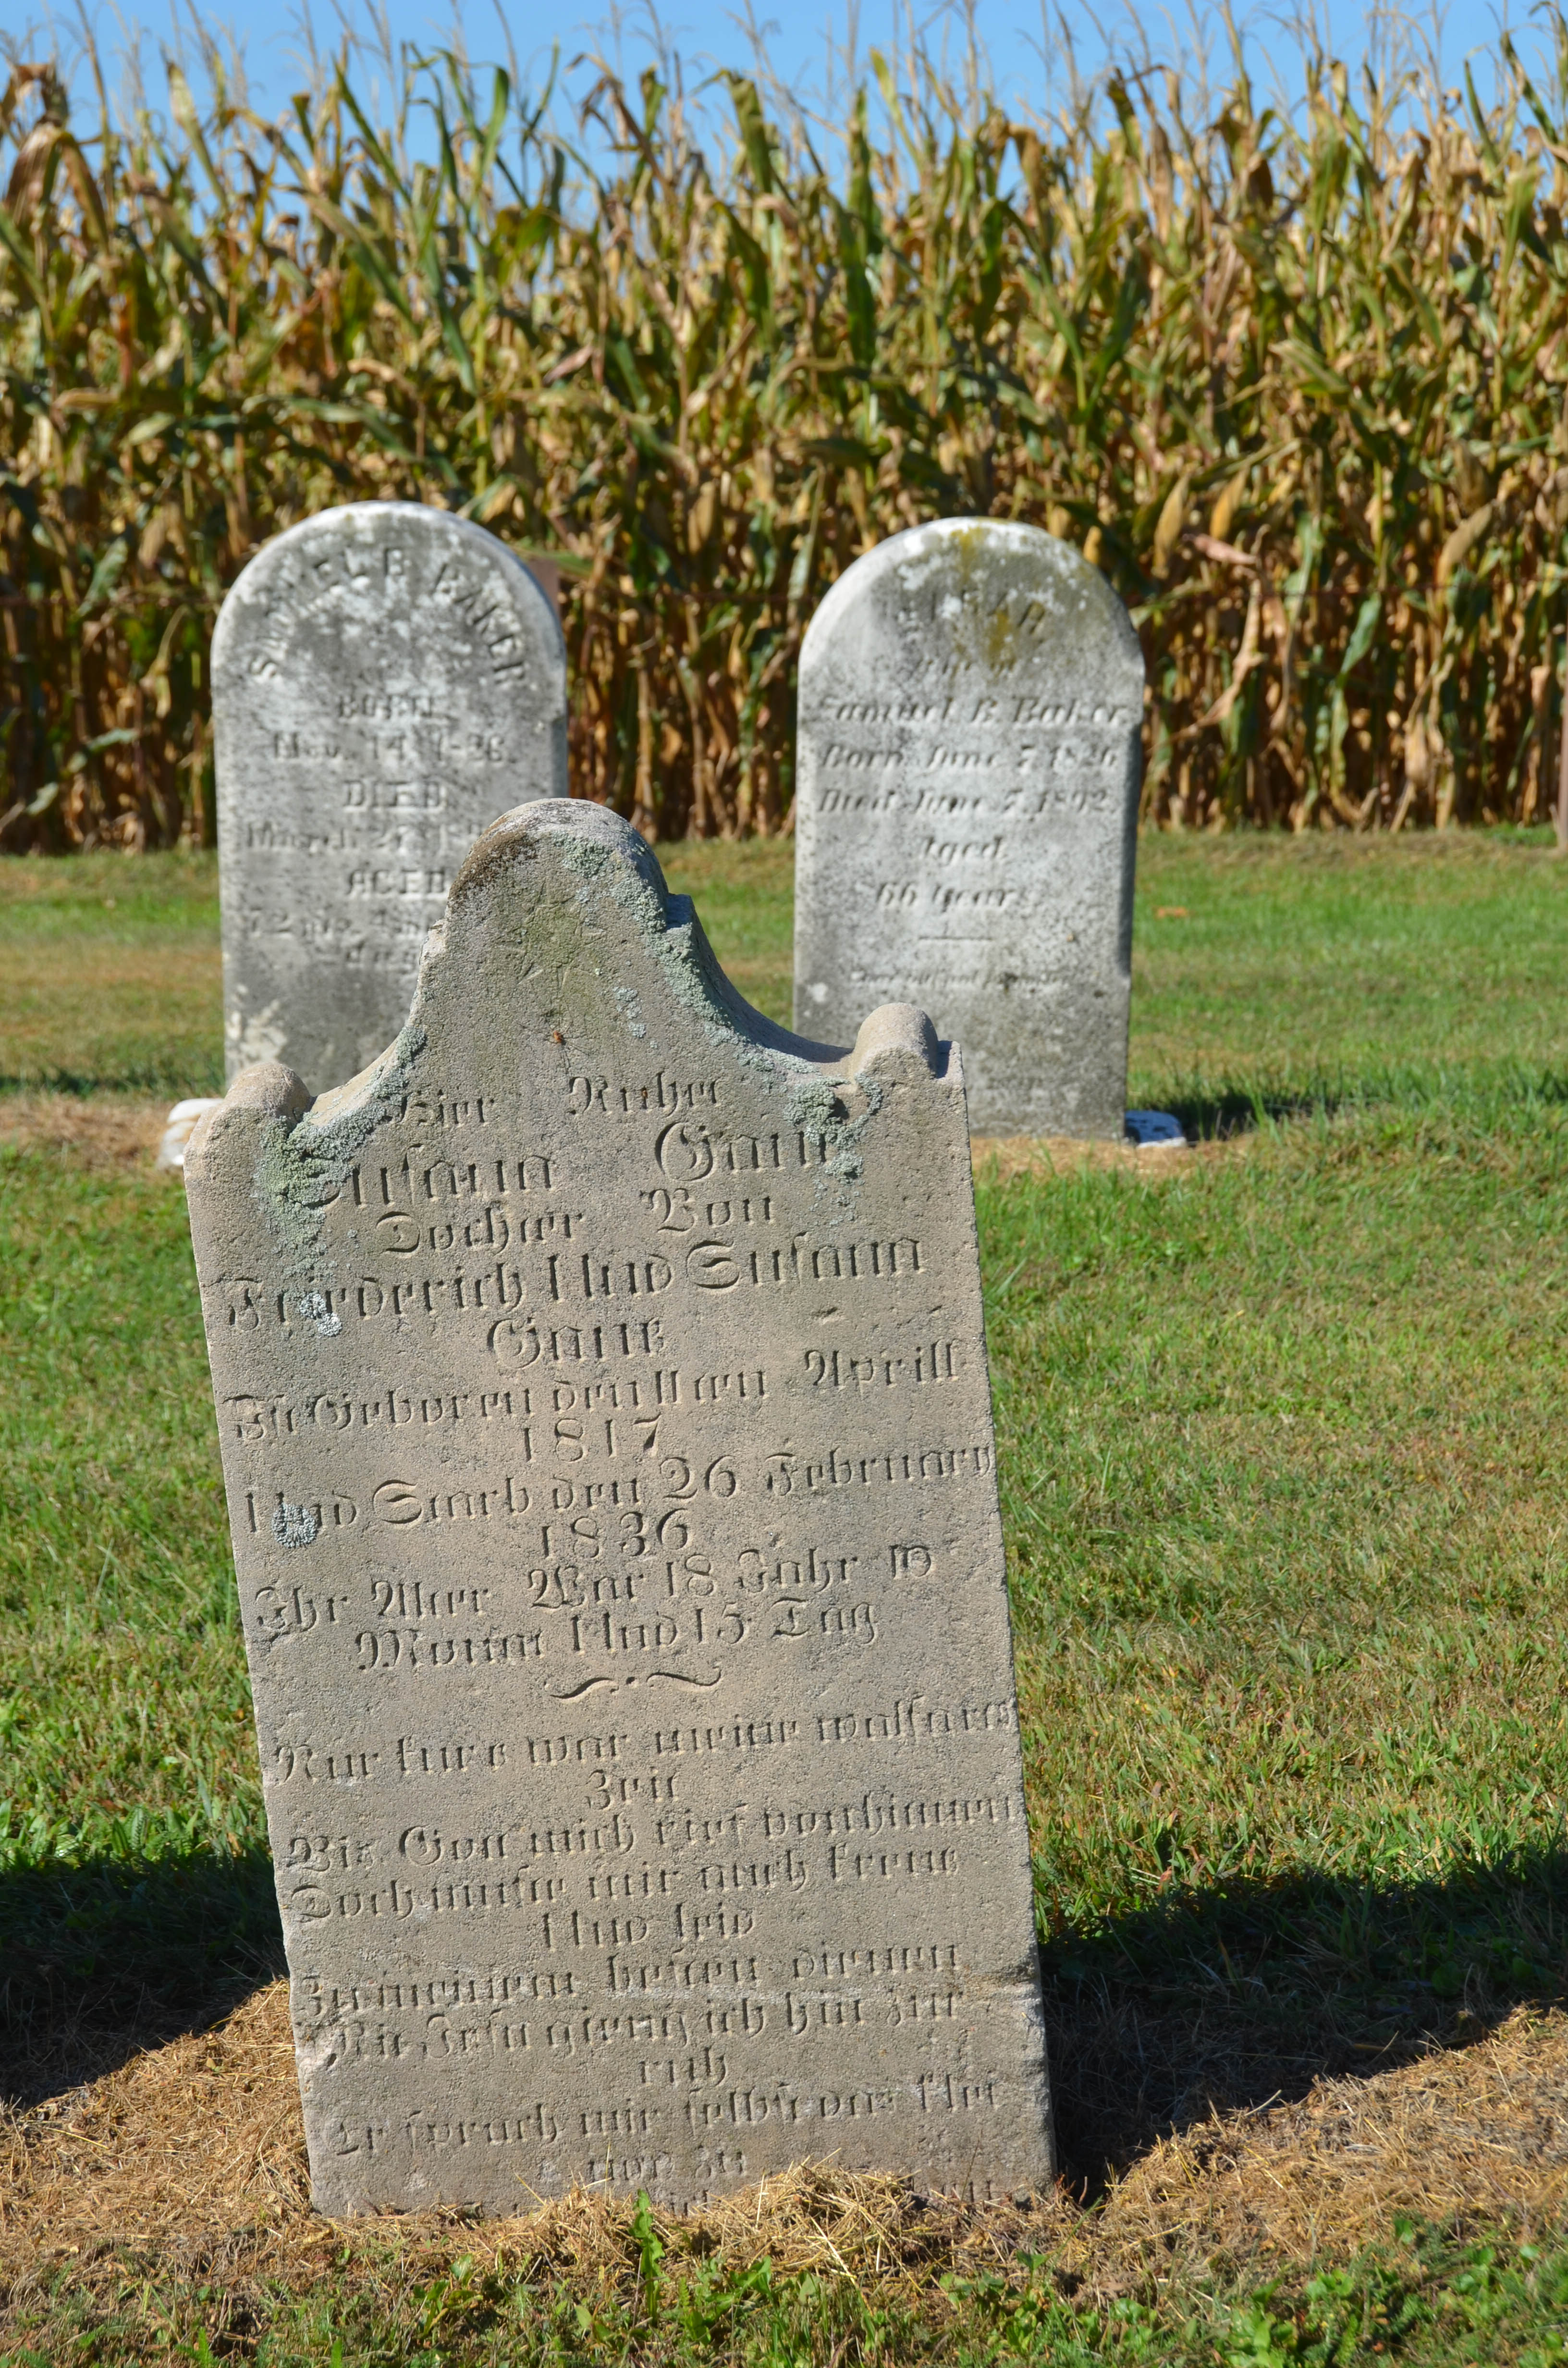 In this one, most of the headstones were from the early 1800s.